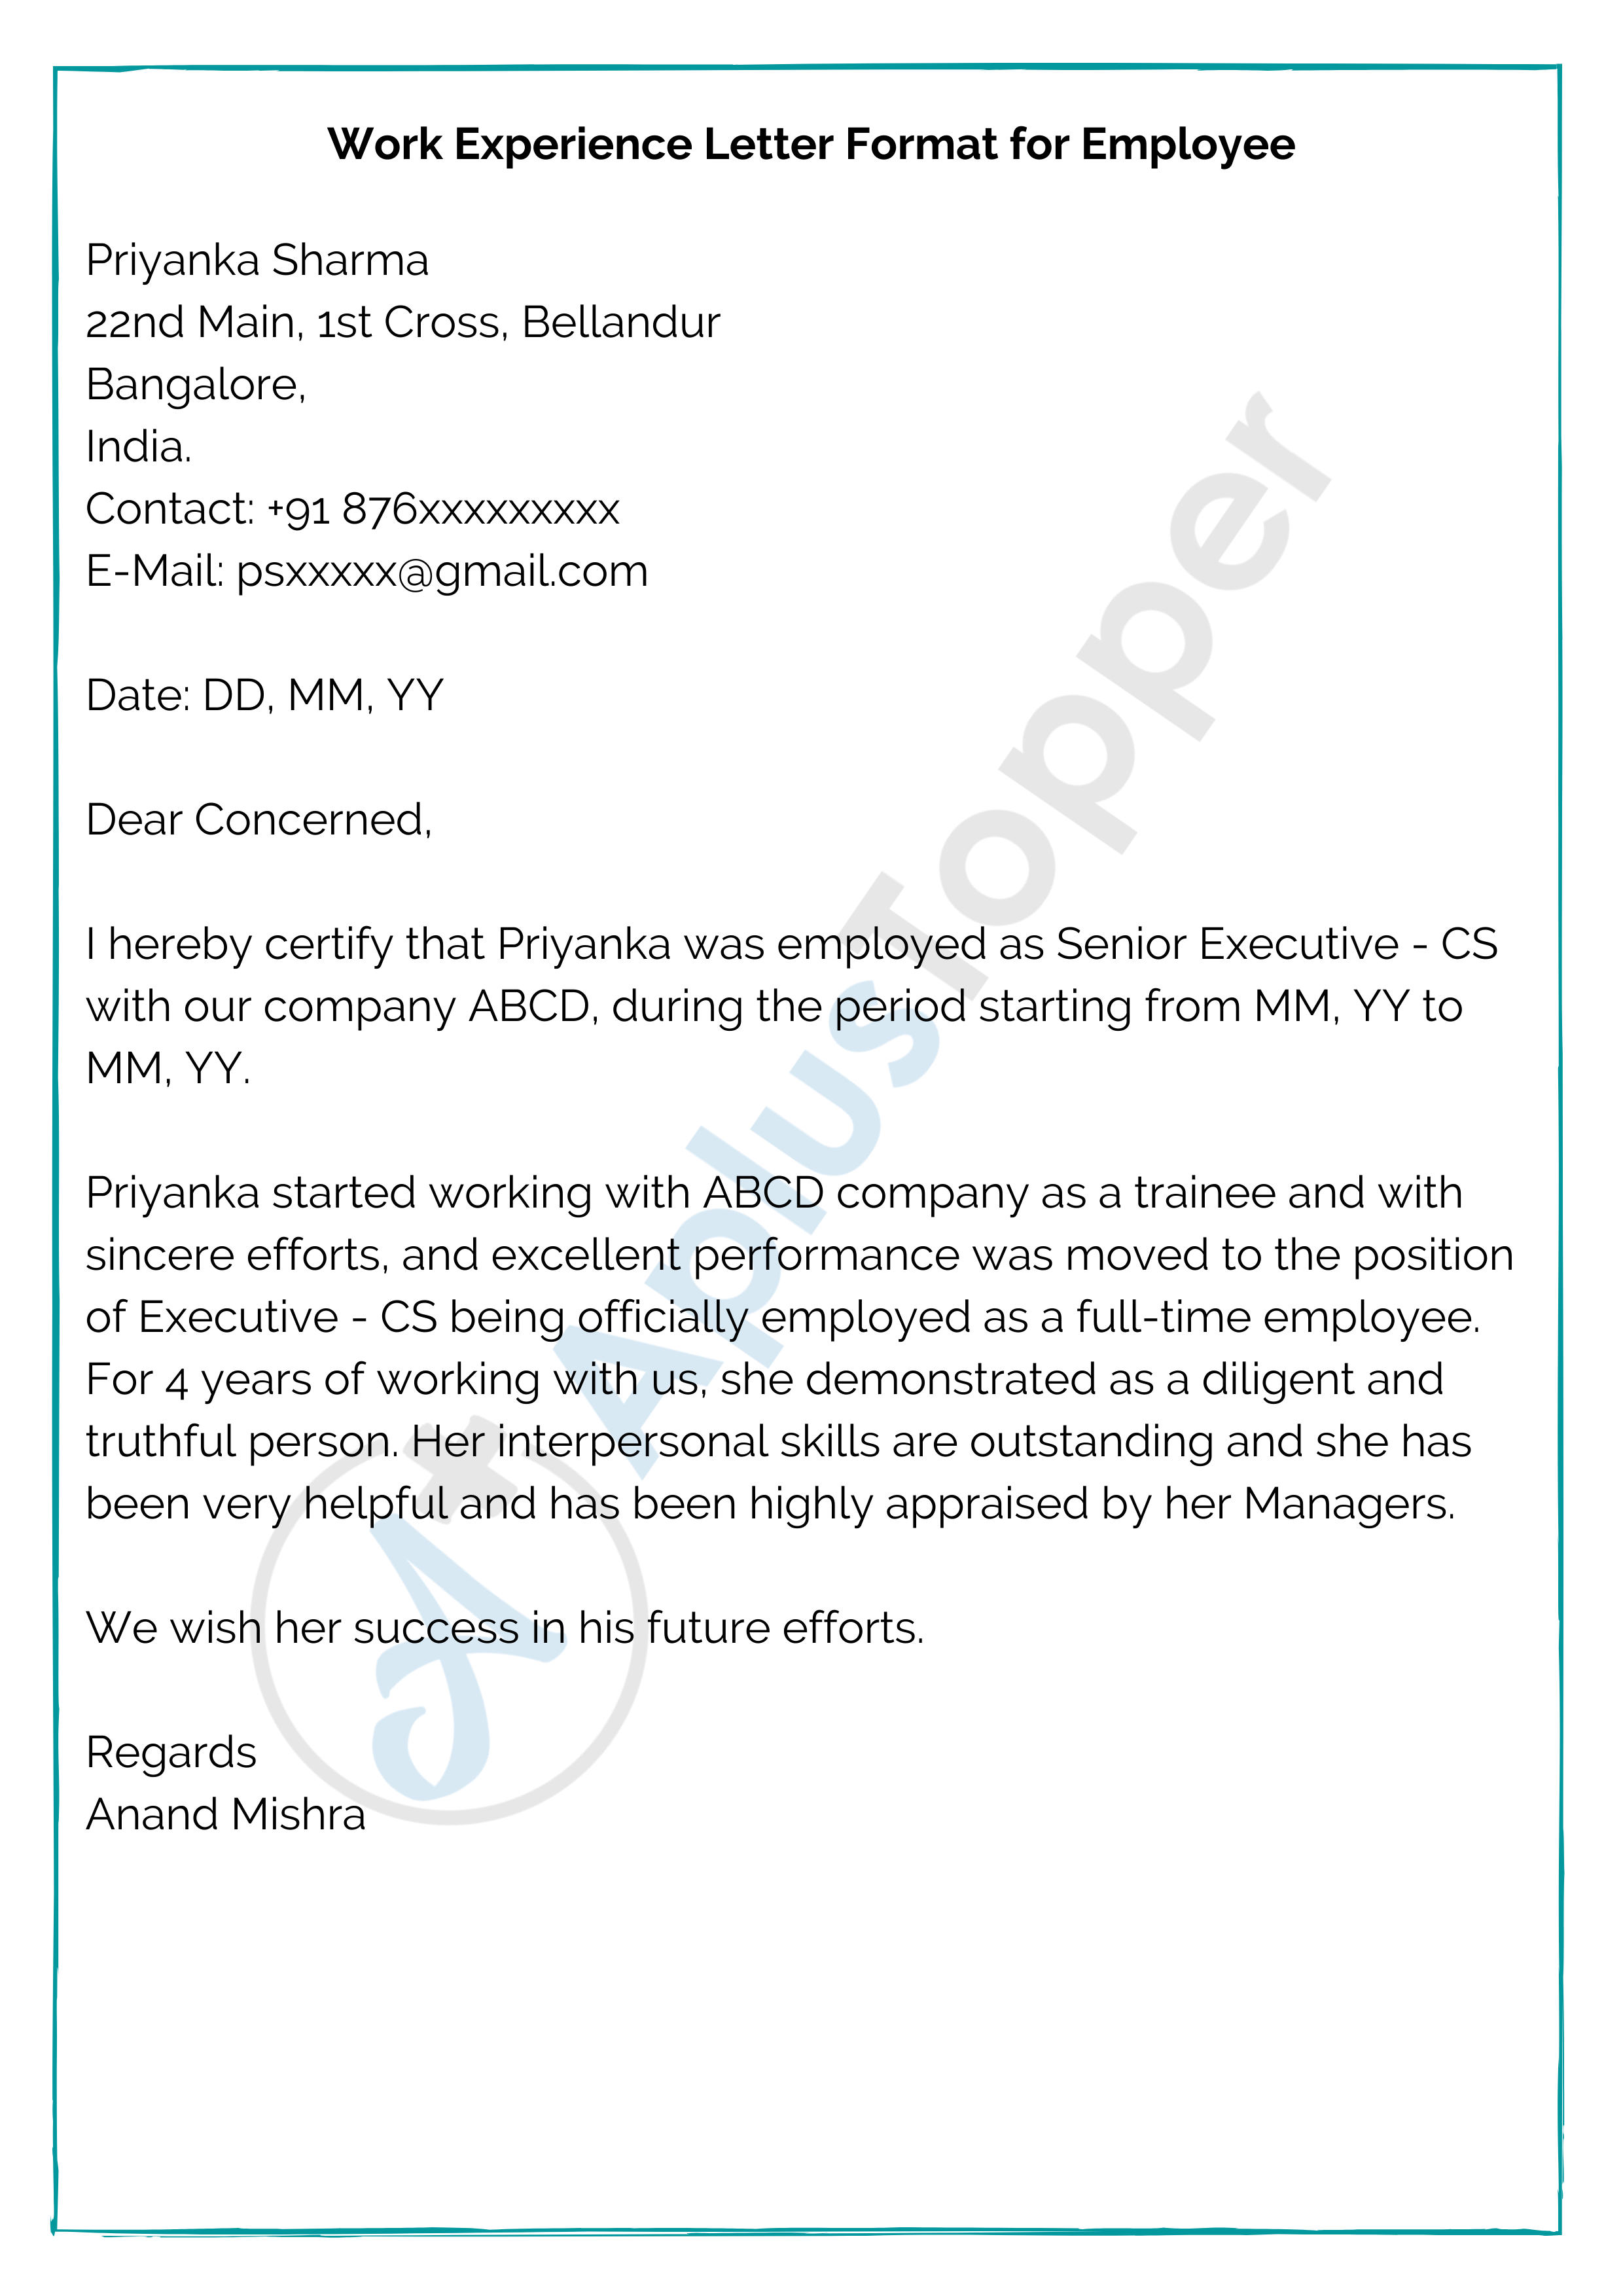 Work Experience Letter Format for Employee